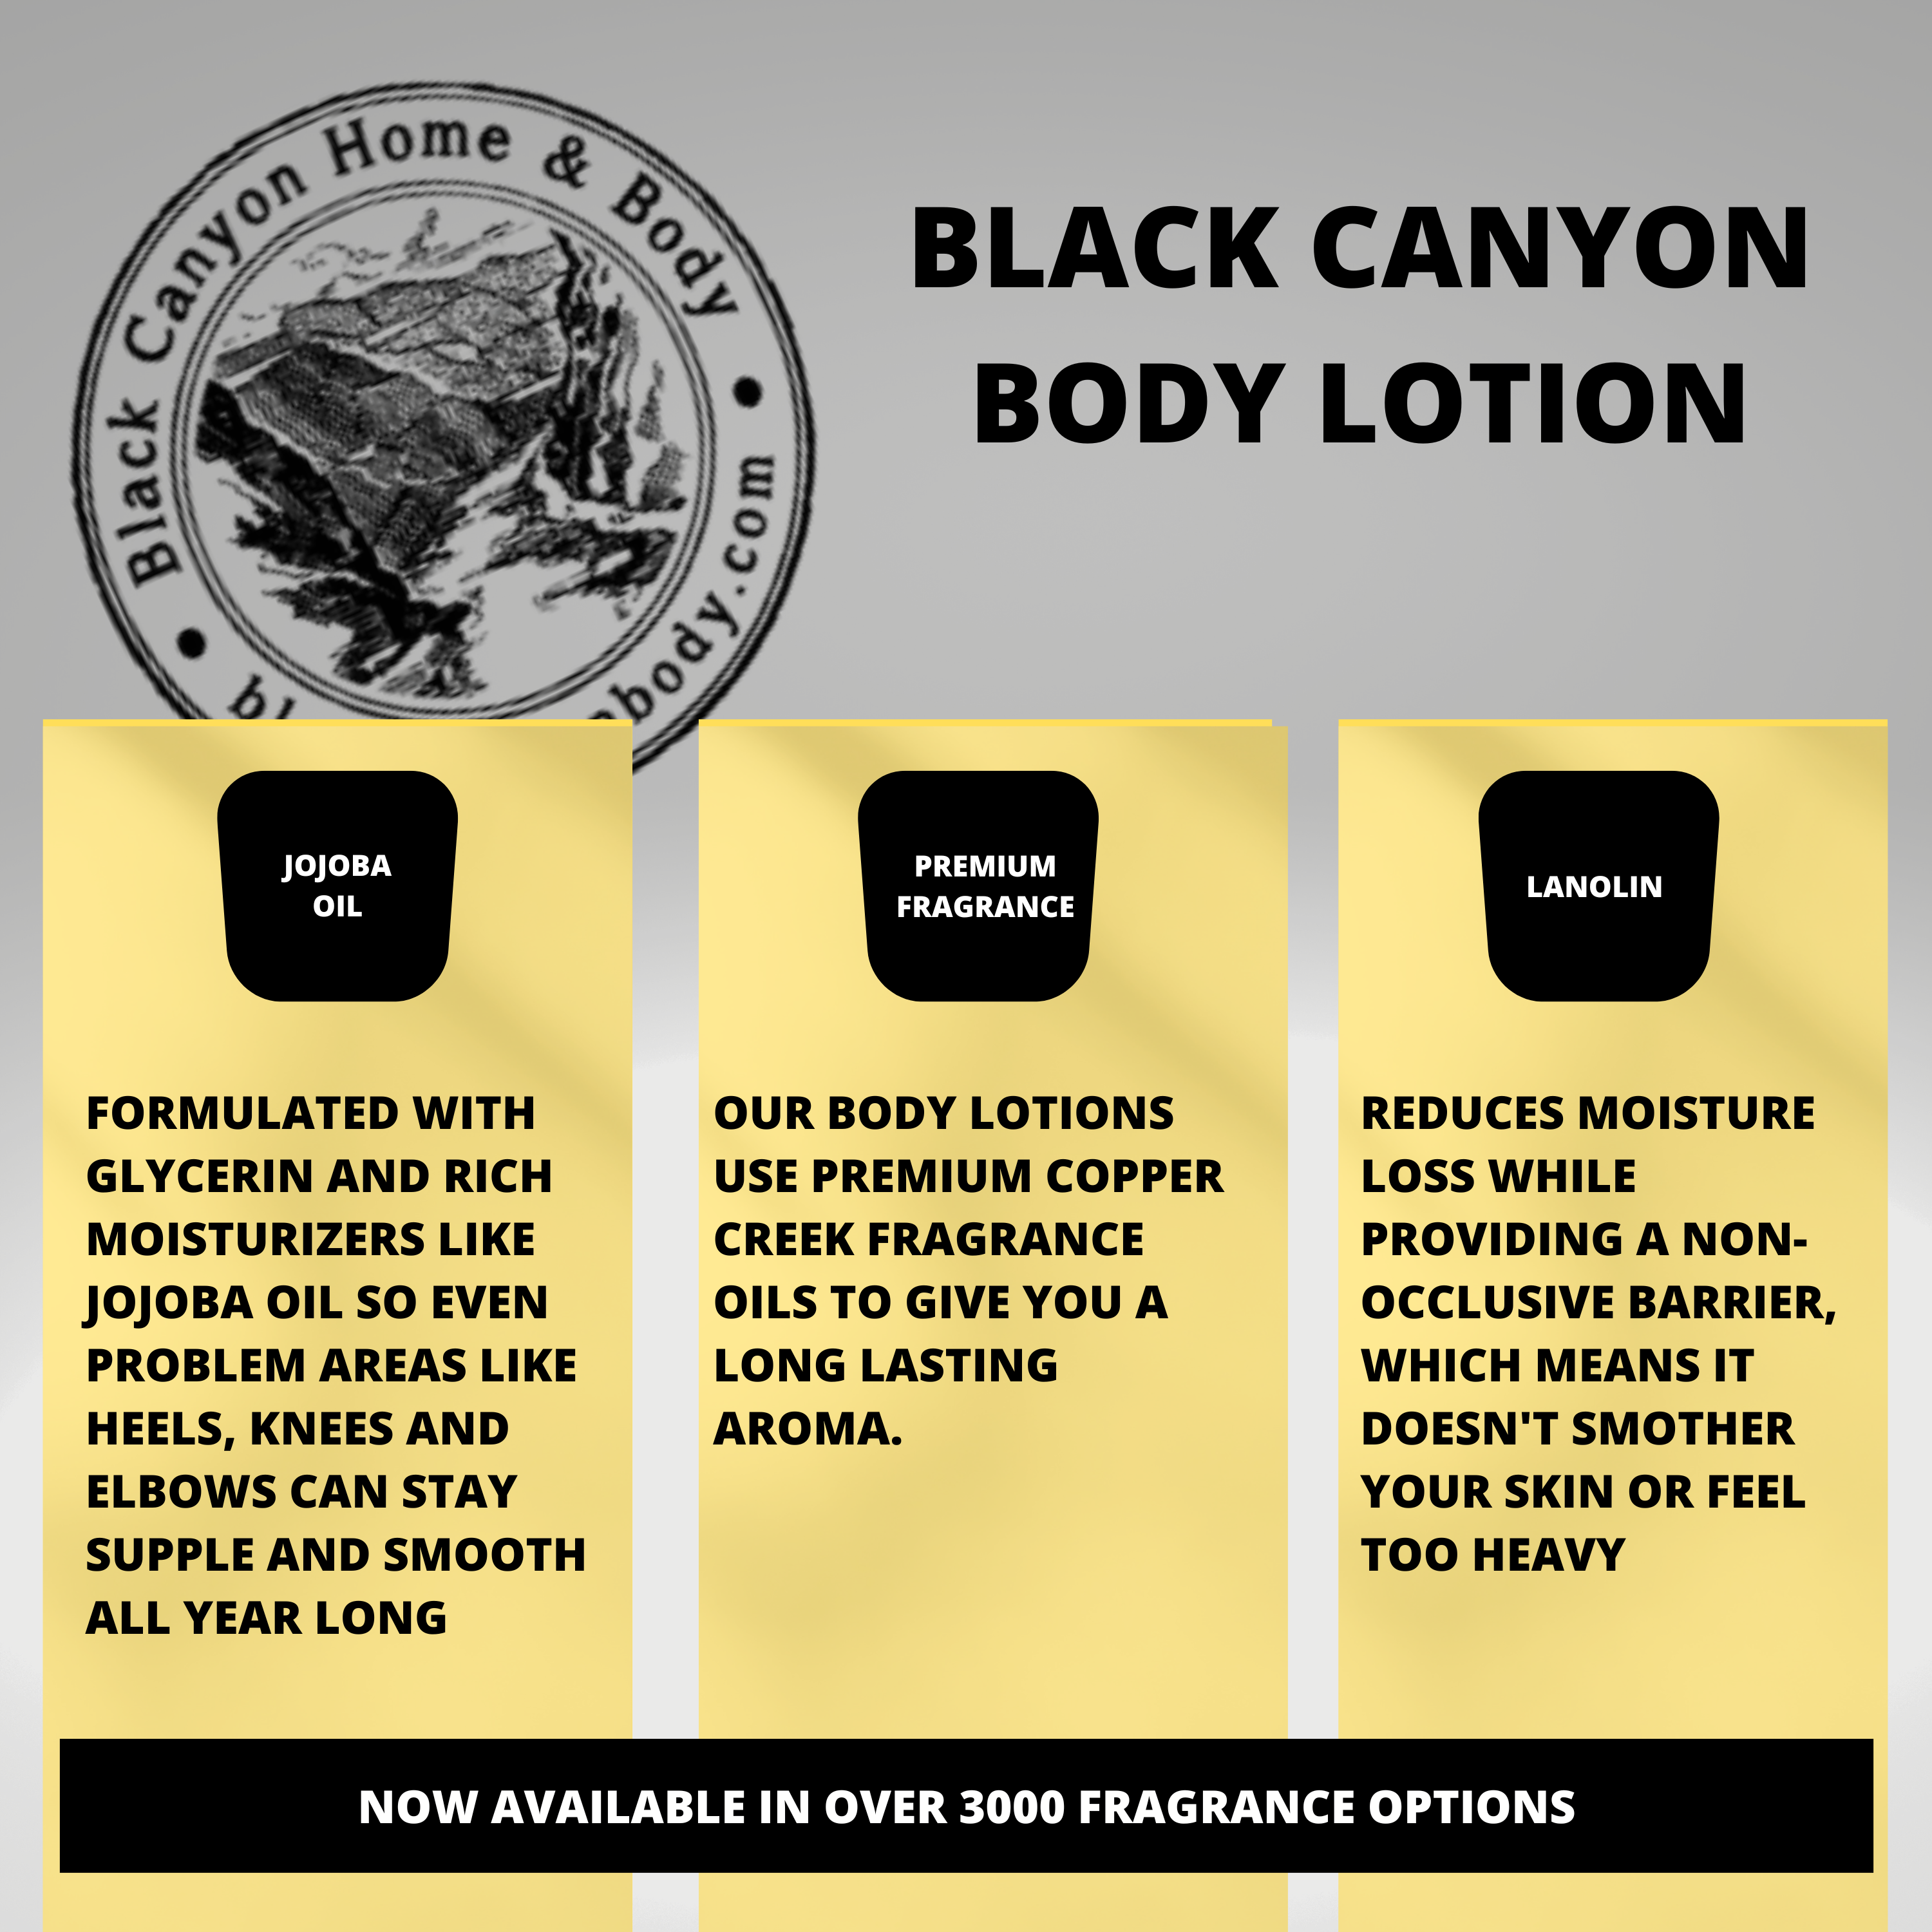 Black Canyon Apple Candy Scented Luxury Body Lotion with Lanolin and Jojoba Oil